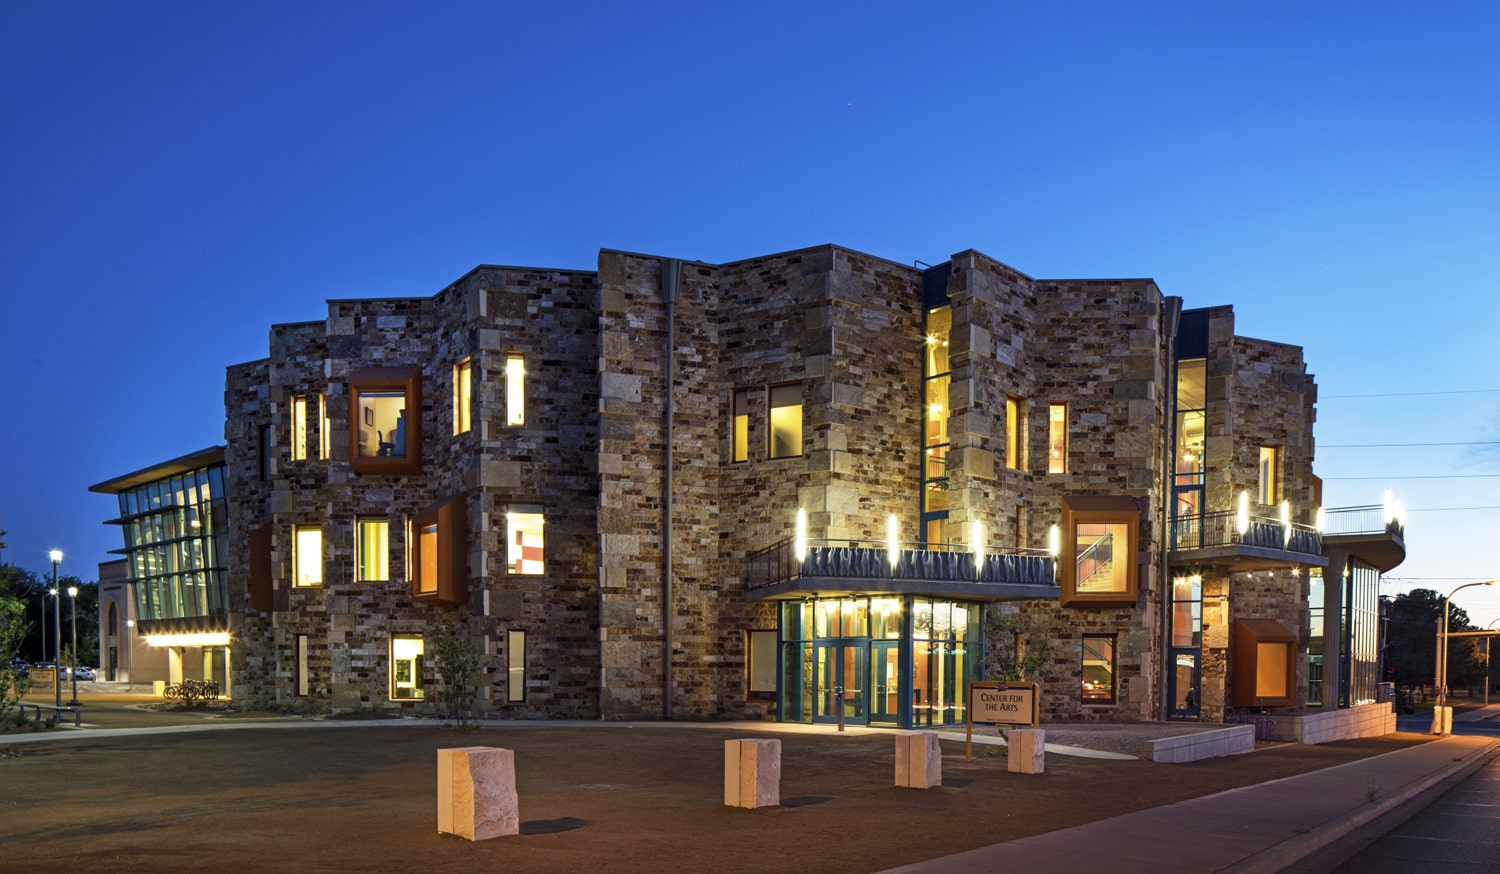 Green Building & Design Magazine Features NMSU Center for the Arts